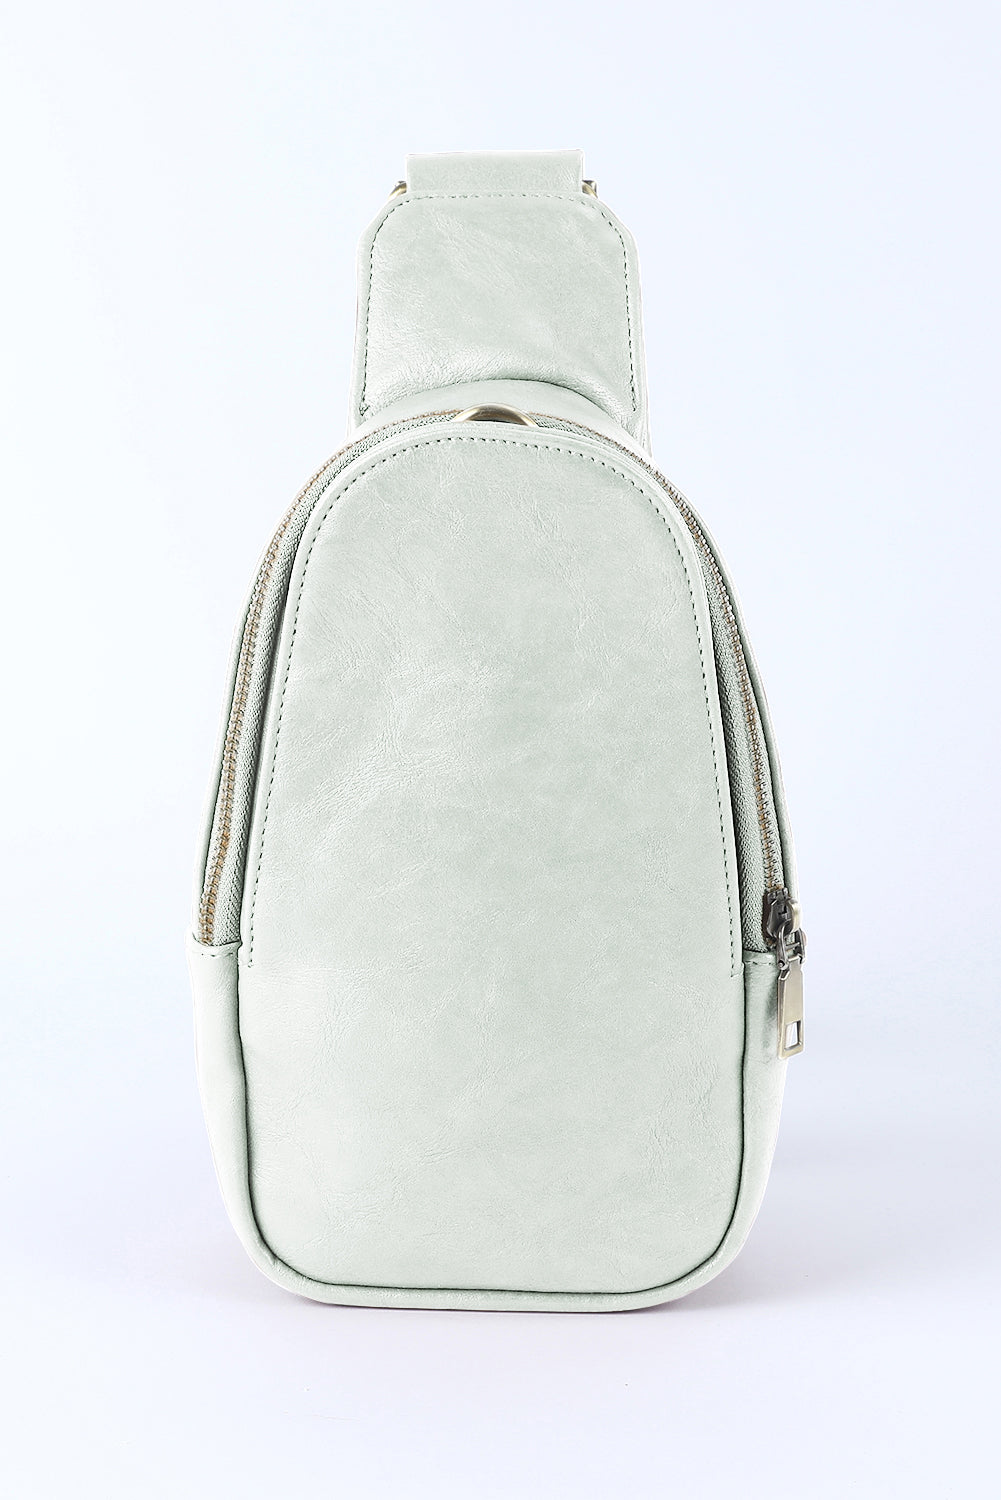 Gray Faux Leather Zipped Crossbody Chest Bag